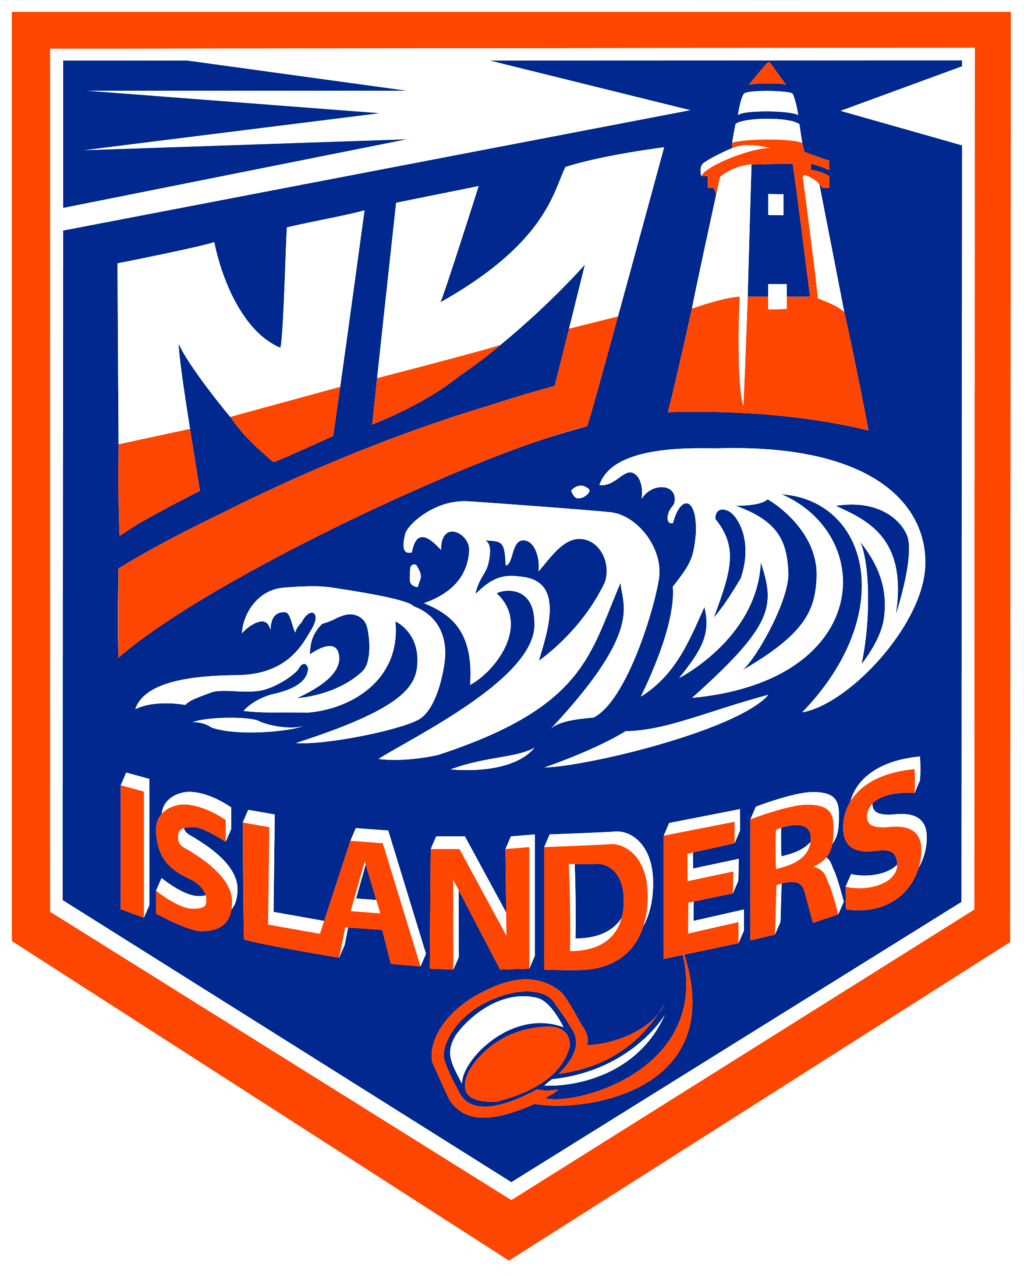 nyi 08 NHL New York Islanders, New York Islanders SVG Vector, New York Islanders Clipart, New York Islanders Ice Hockey Kit SVG, DXF, PNG, EPS Instant download NHL-Files for silhouette, files for clipping.